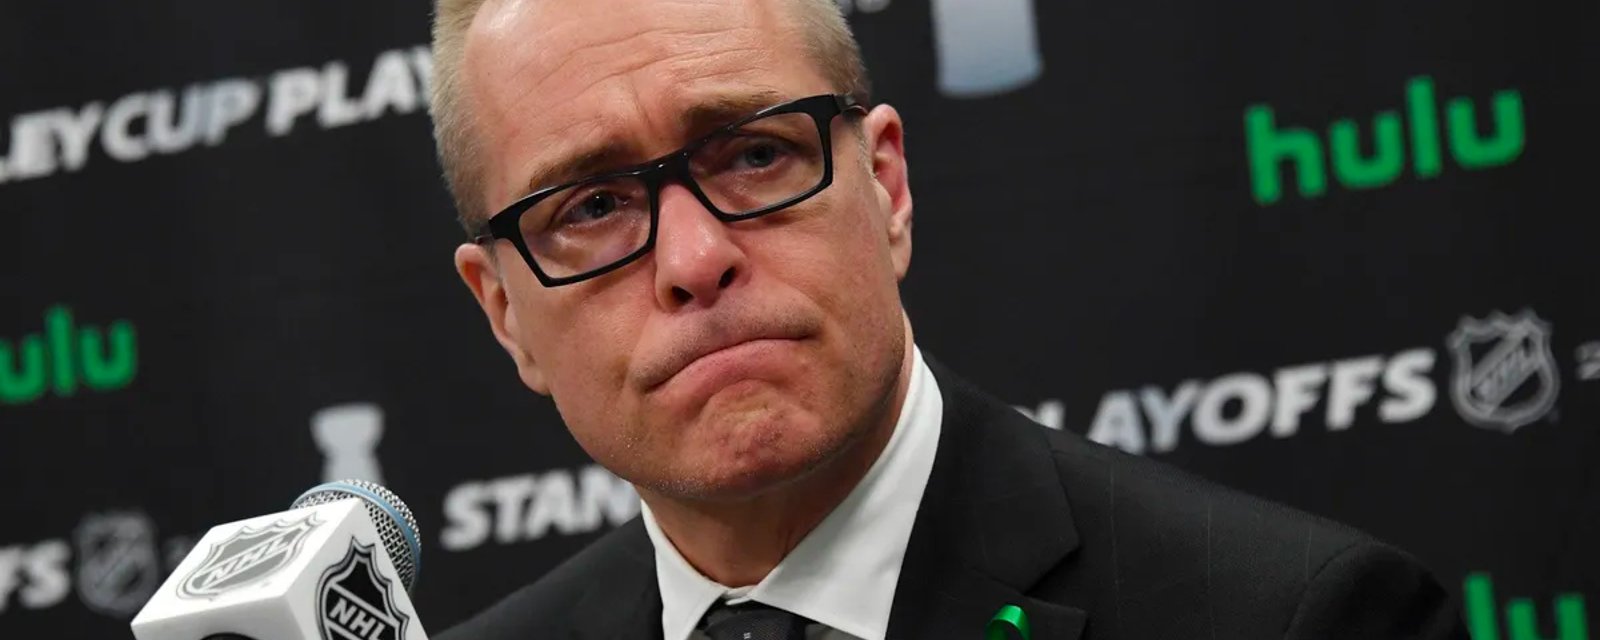 Paul Maurice reveals stunning reason why he quit the Jets last season